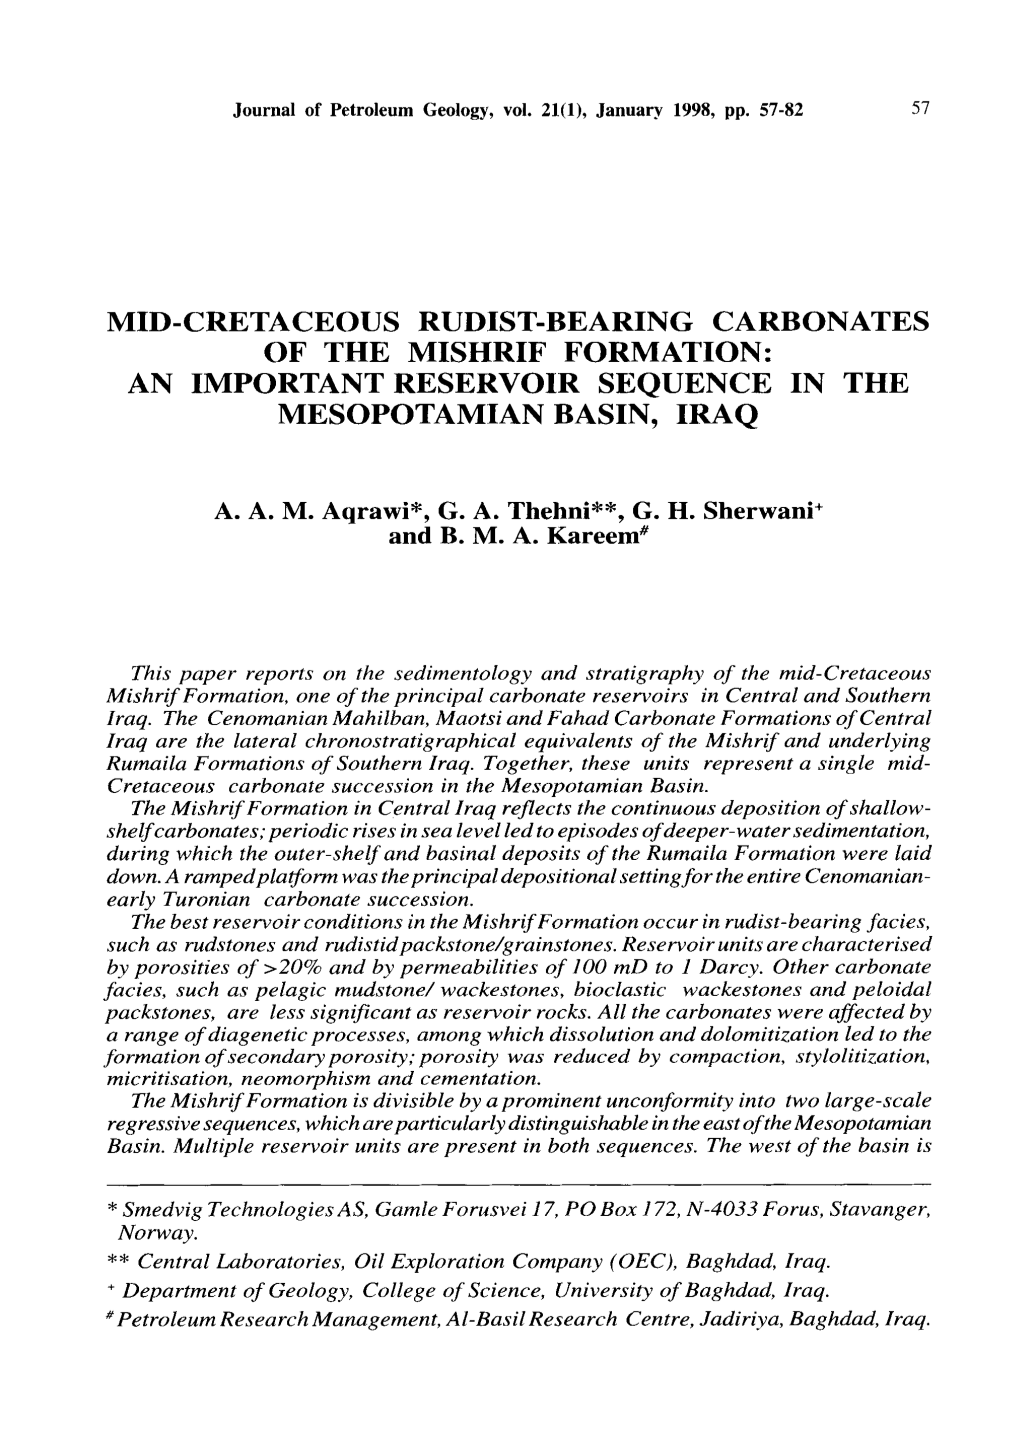 Mid-Cretaceous Rudist-Bearing Carbonates of the Mishrif Formation: an Important Reservoir Sequence in the Mesopotamian Basin, Iraq